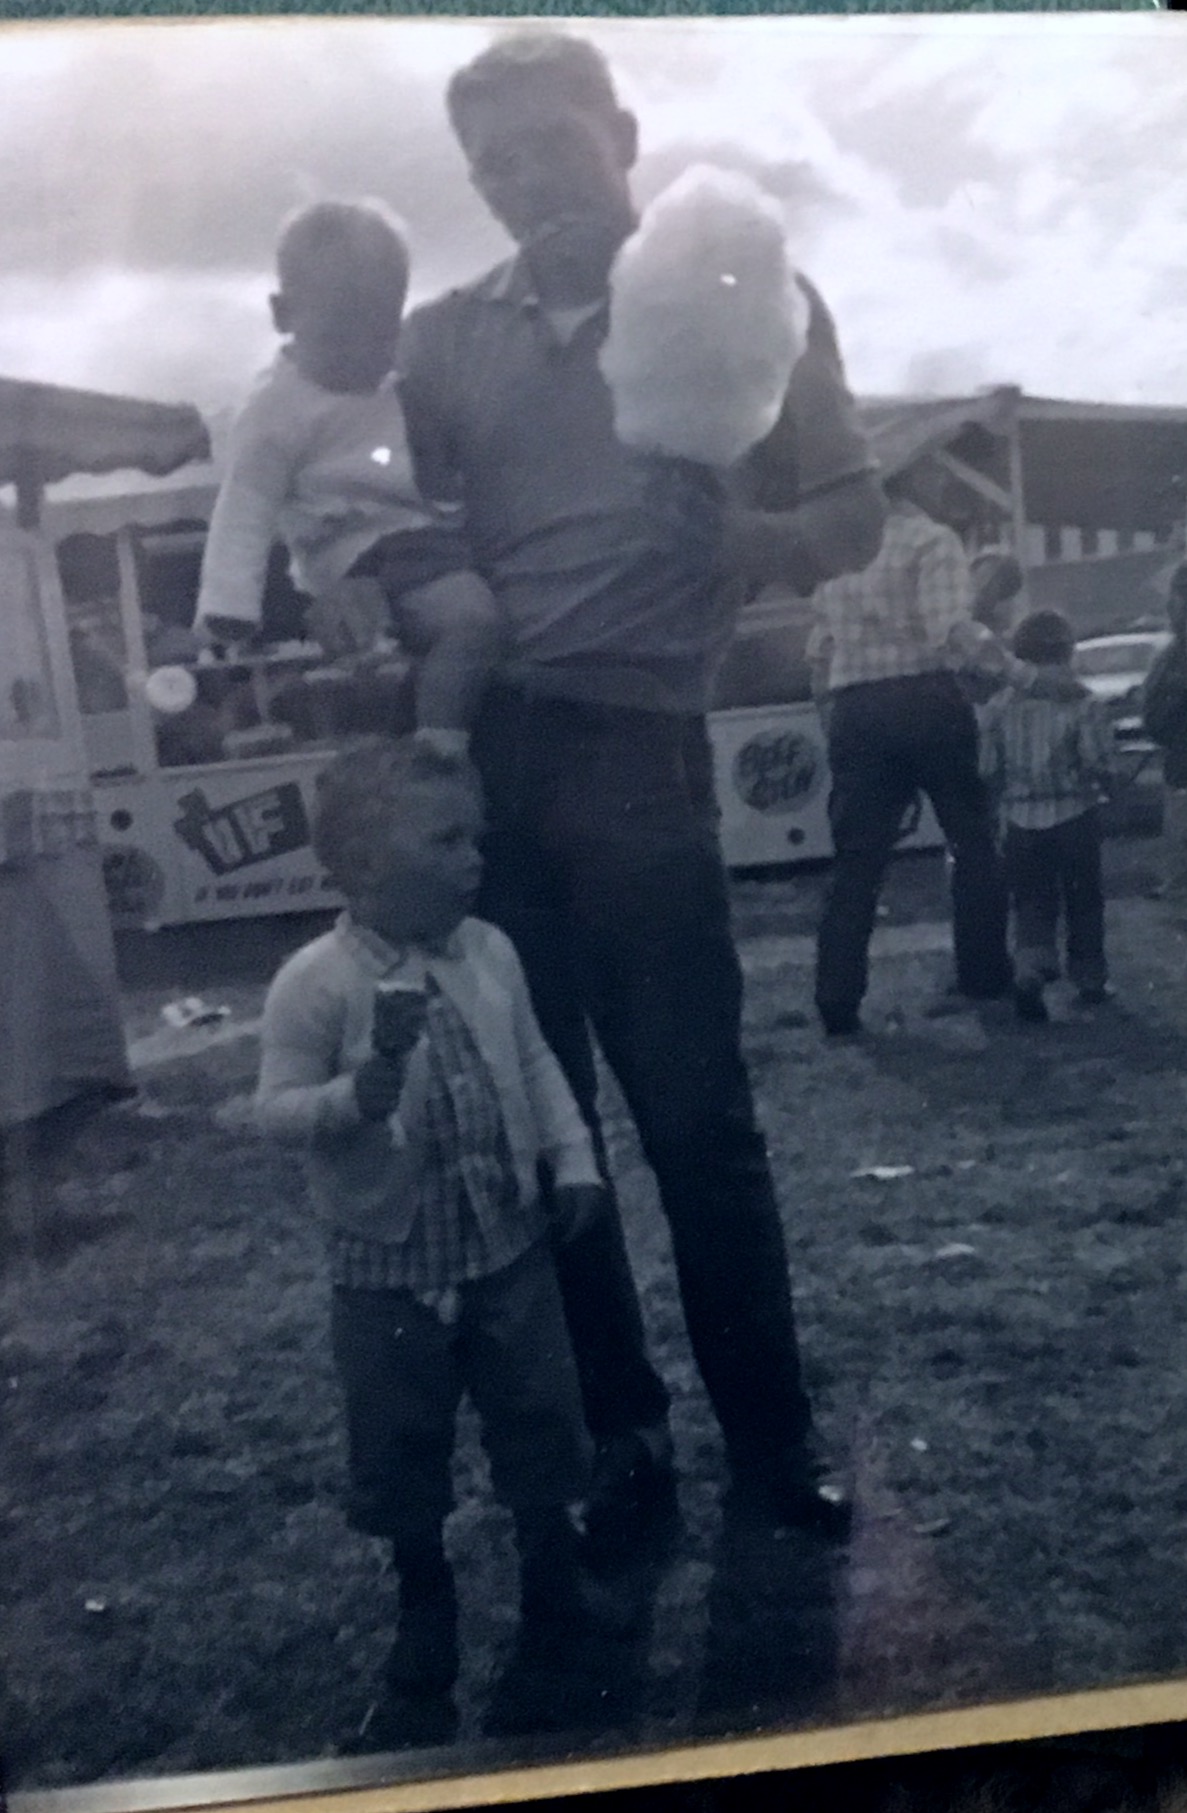 Dad, Chuck and me at the carnival. Bend, Oregon 1961